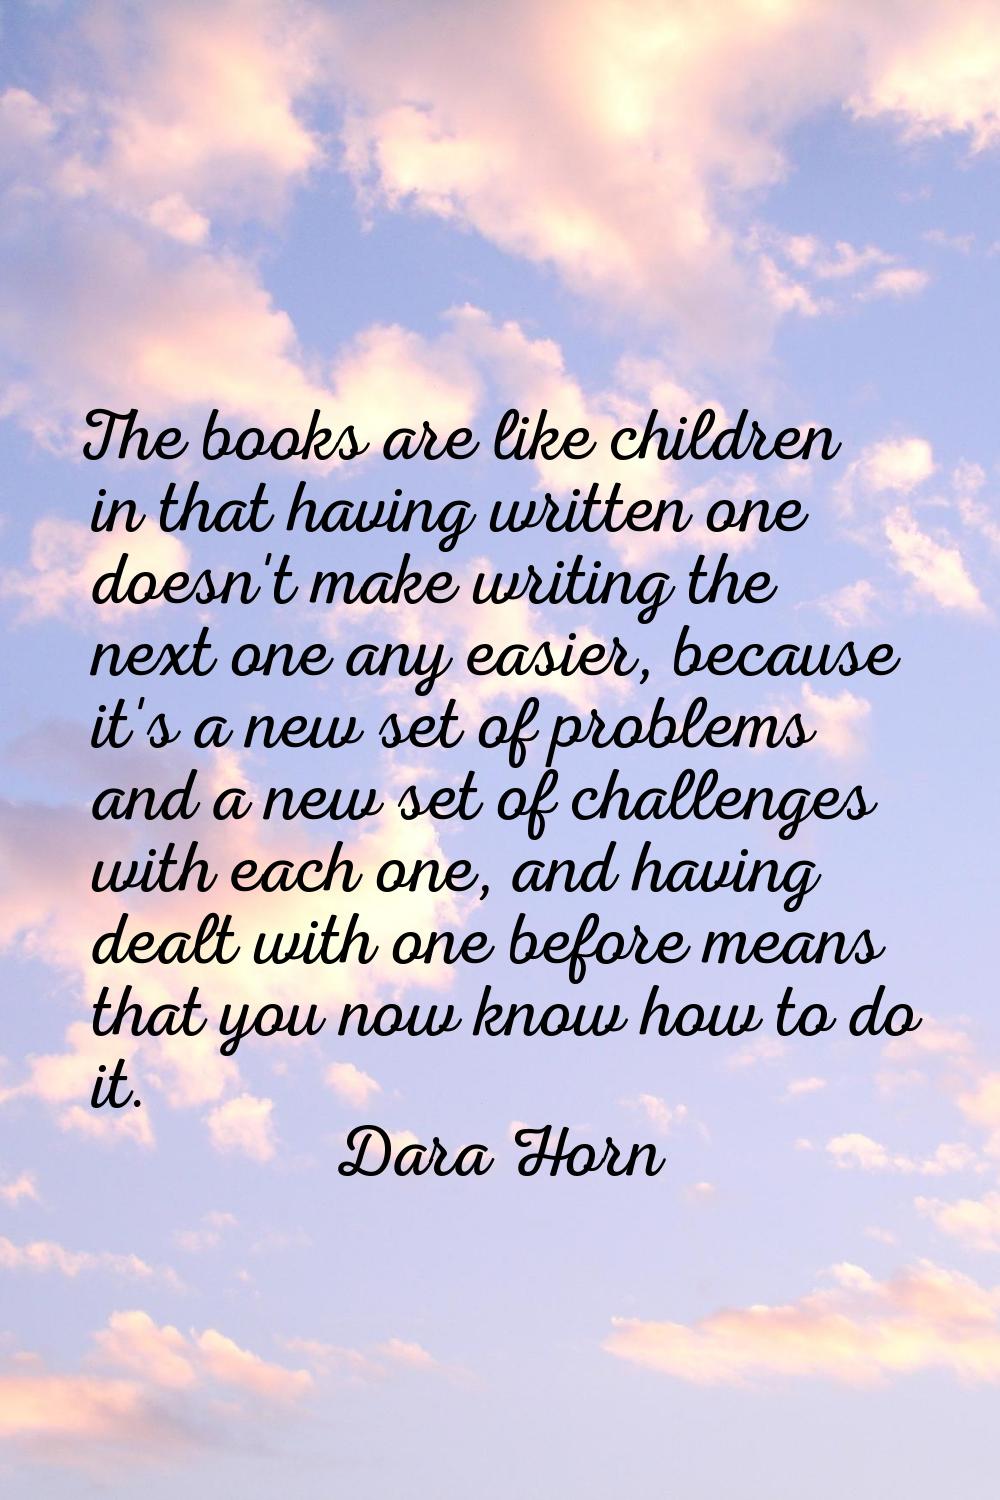 The books are like children in that having written one doesn't make writing the next one any easier